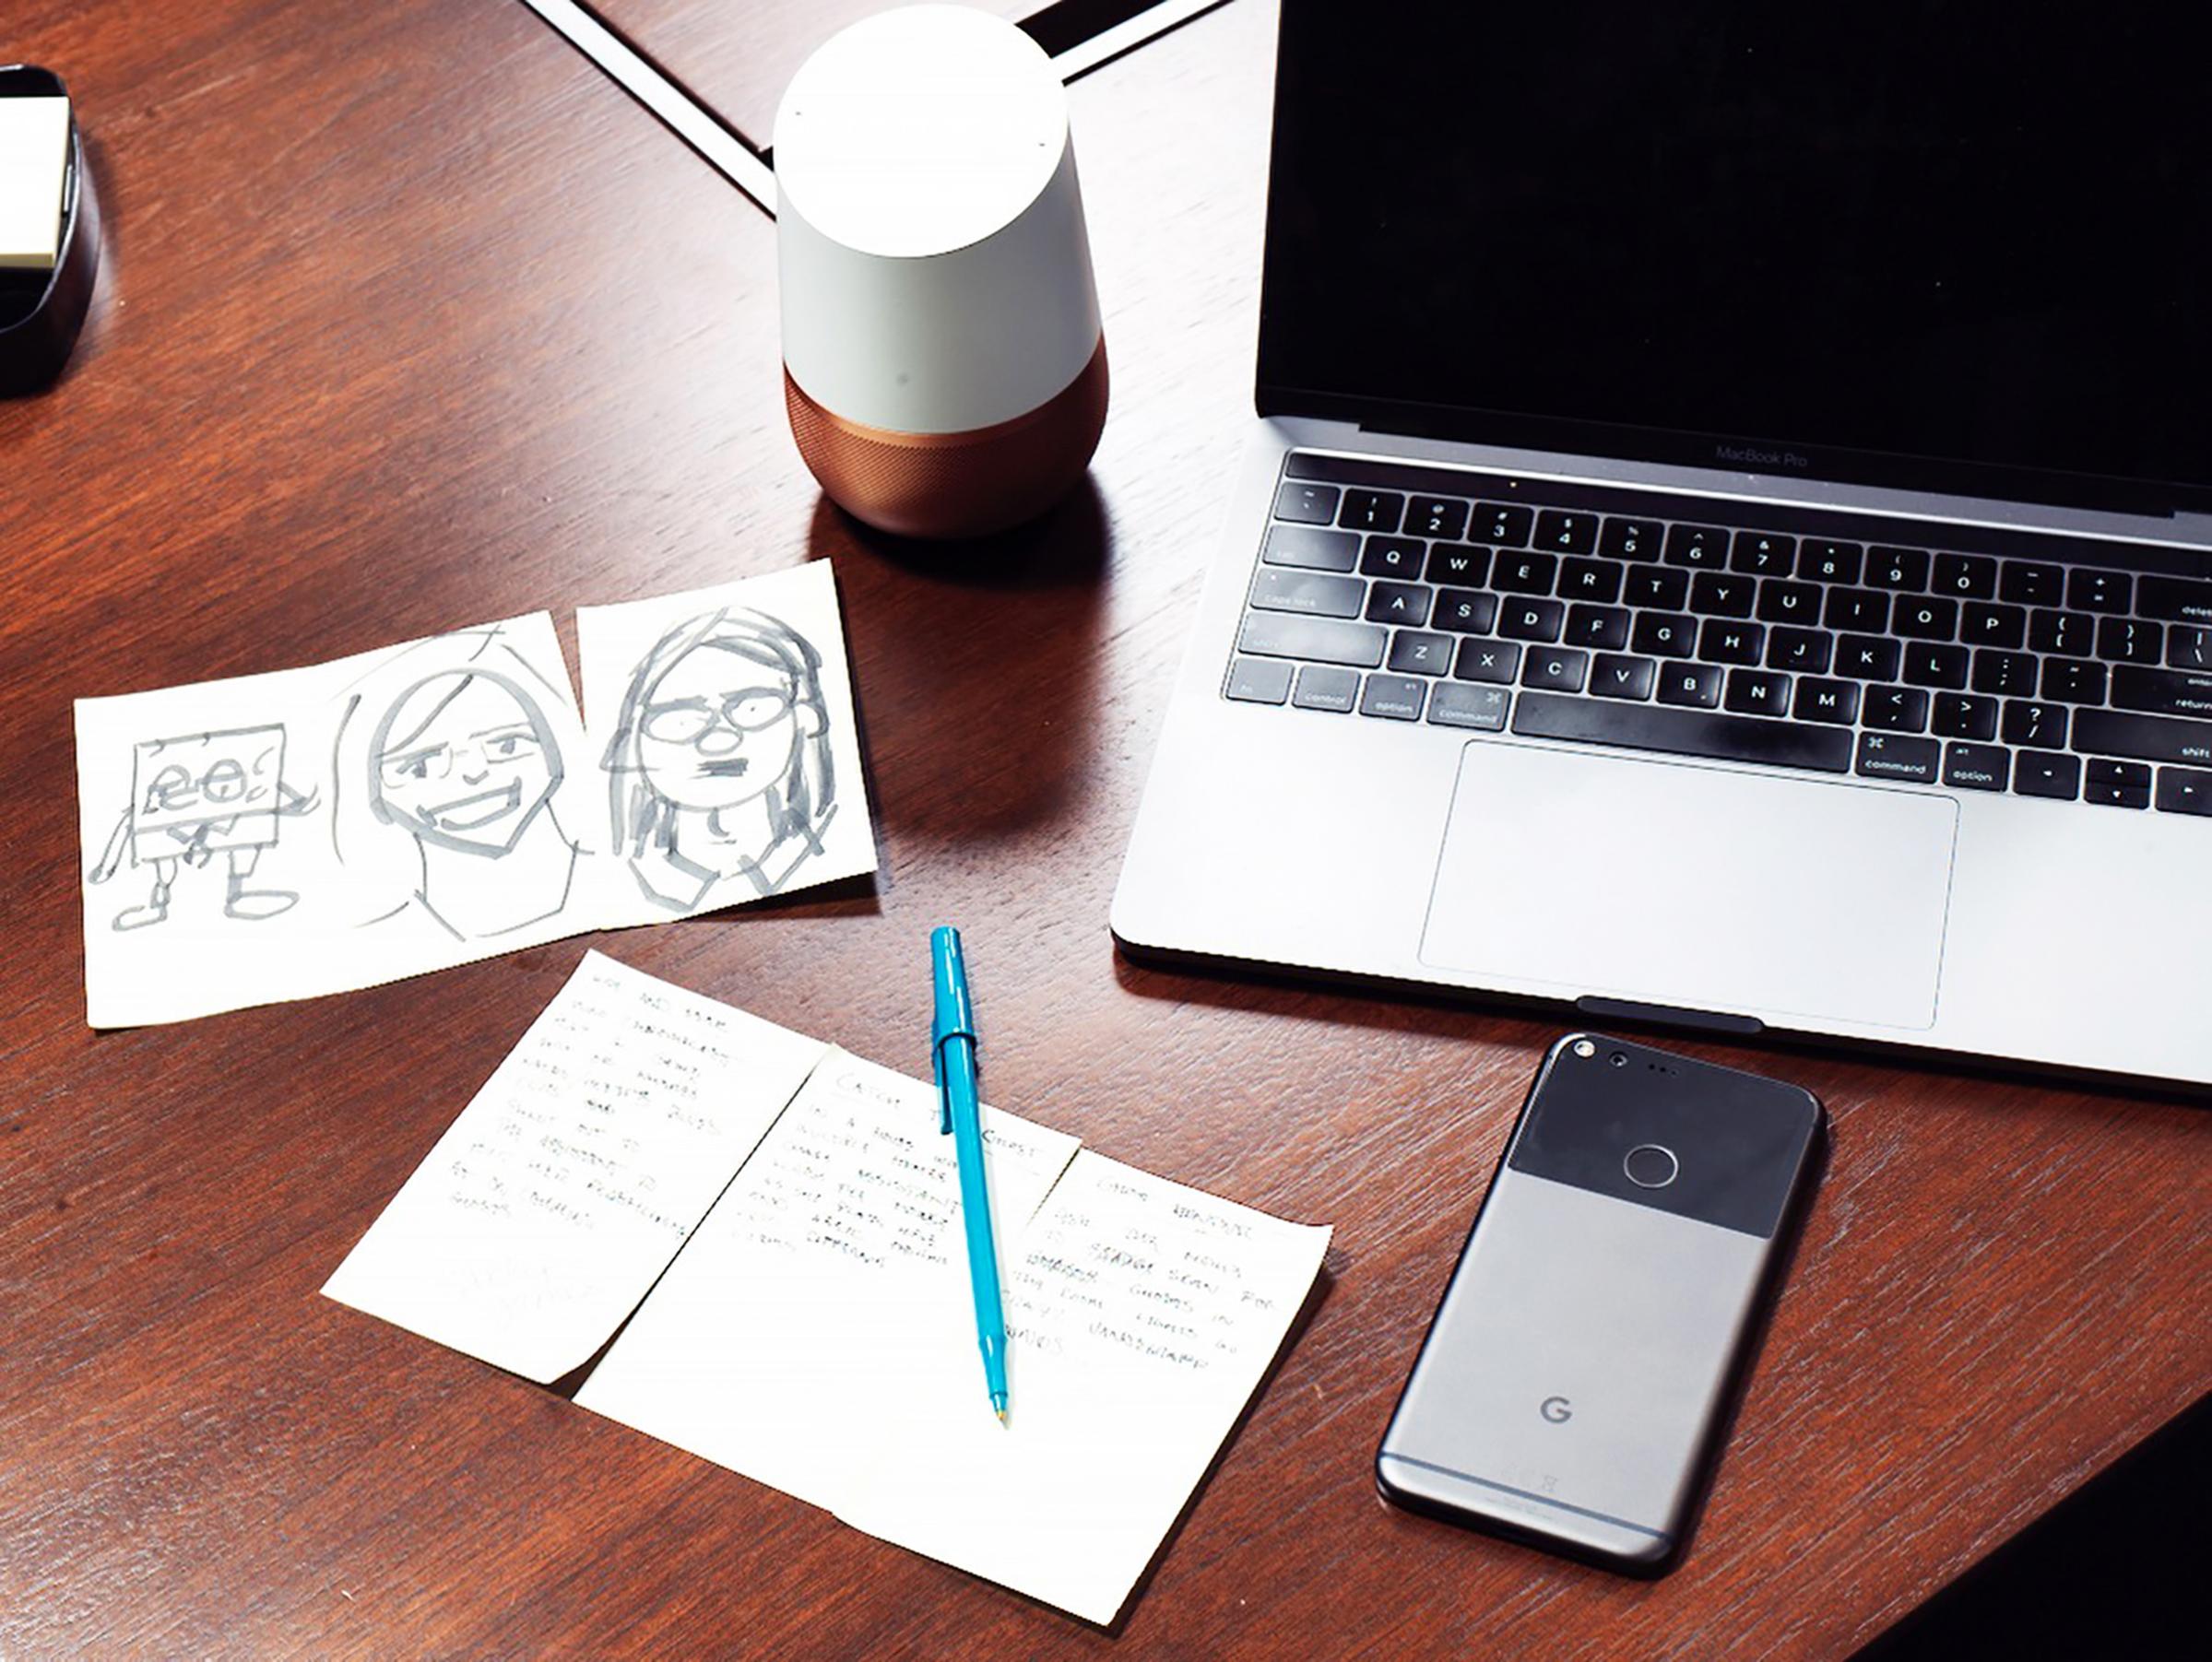 Google’s personality team draws on a broad range of sources to hone the character of the company’s voice-enabled Assistant. Writers use notes and doodles to track potential ideas that eventually show up in products like this white-and-brass-colored Google Home, top center, and the Pixel smartphone, bottom right.